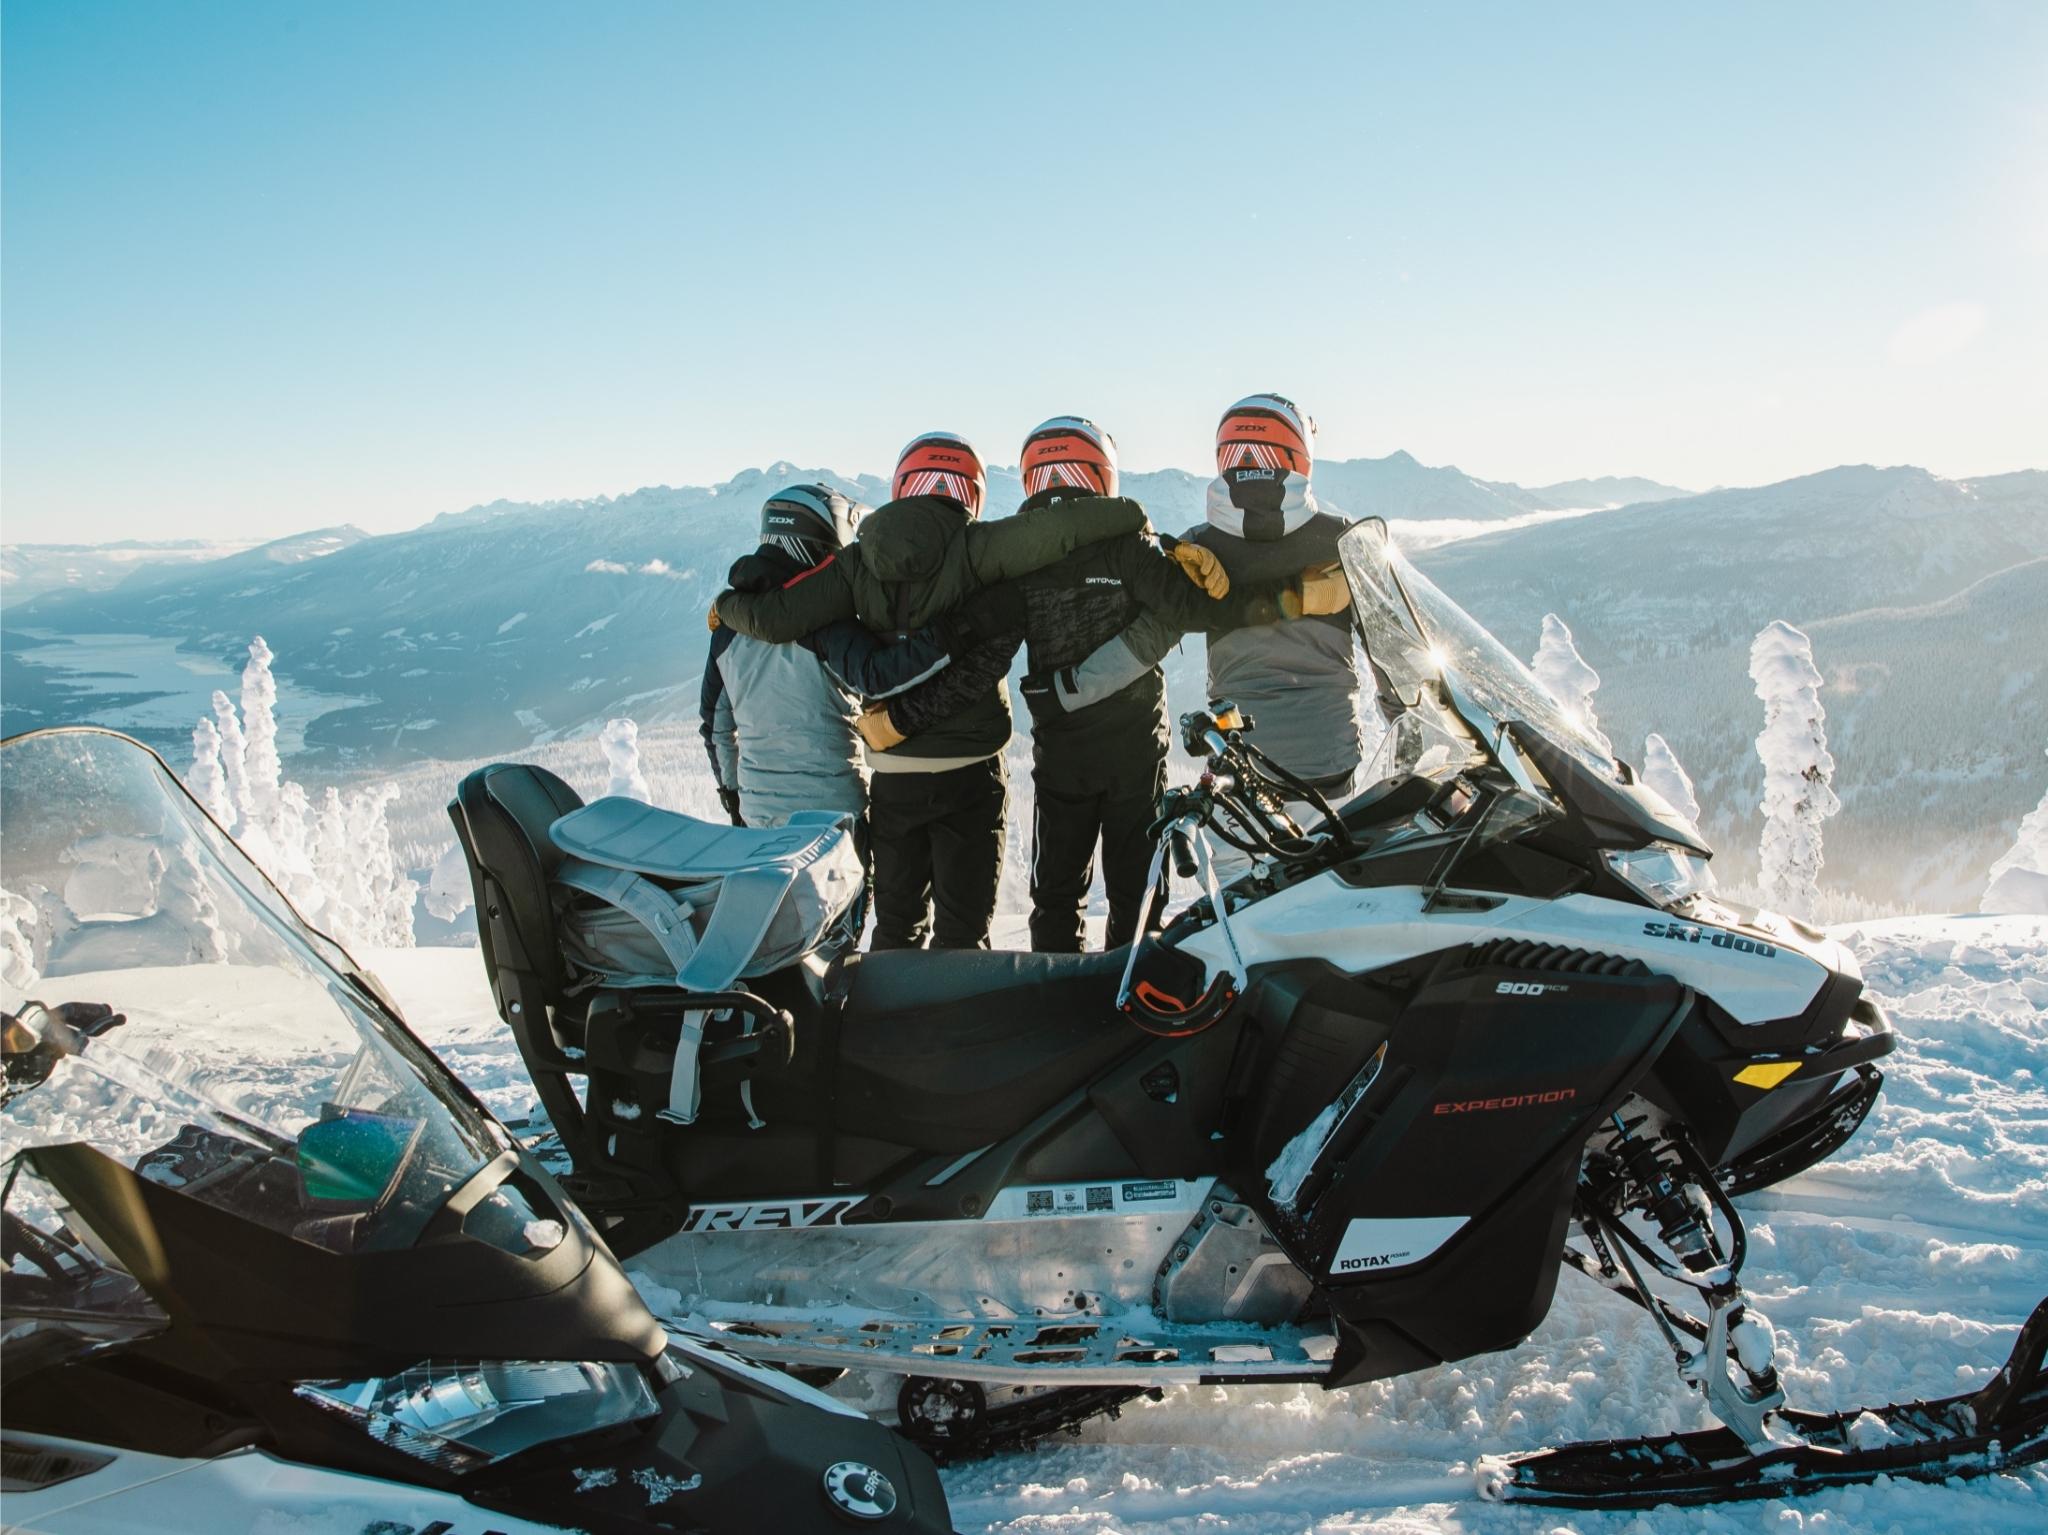 Join a thrilling, exciting all-day ride in Revelstoke, BC